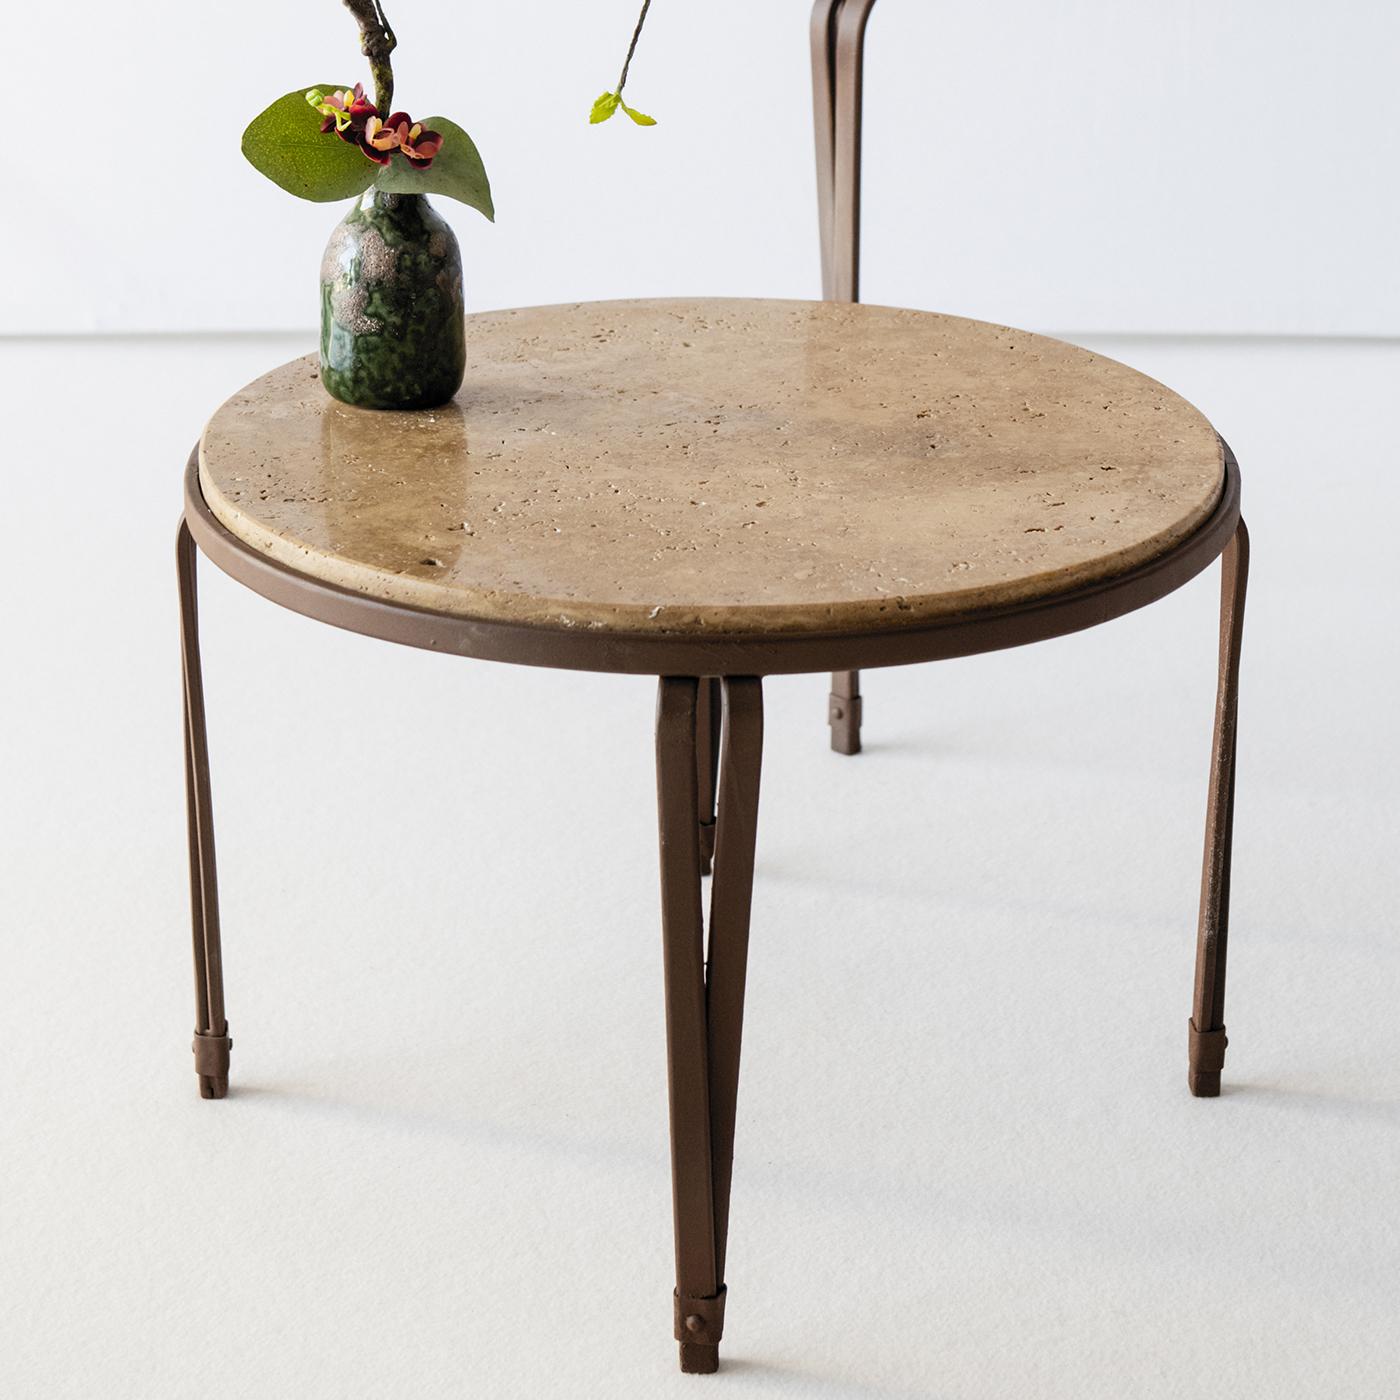 Inspired by traditional Florentine designs, the marina coffee table boasts a beautiful base in stainless steel. Topped with a walnut travertine top, this outdoor table is defined by clean lines for a timeless allure. Perfect for plants, snacks or